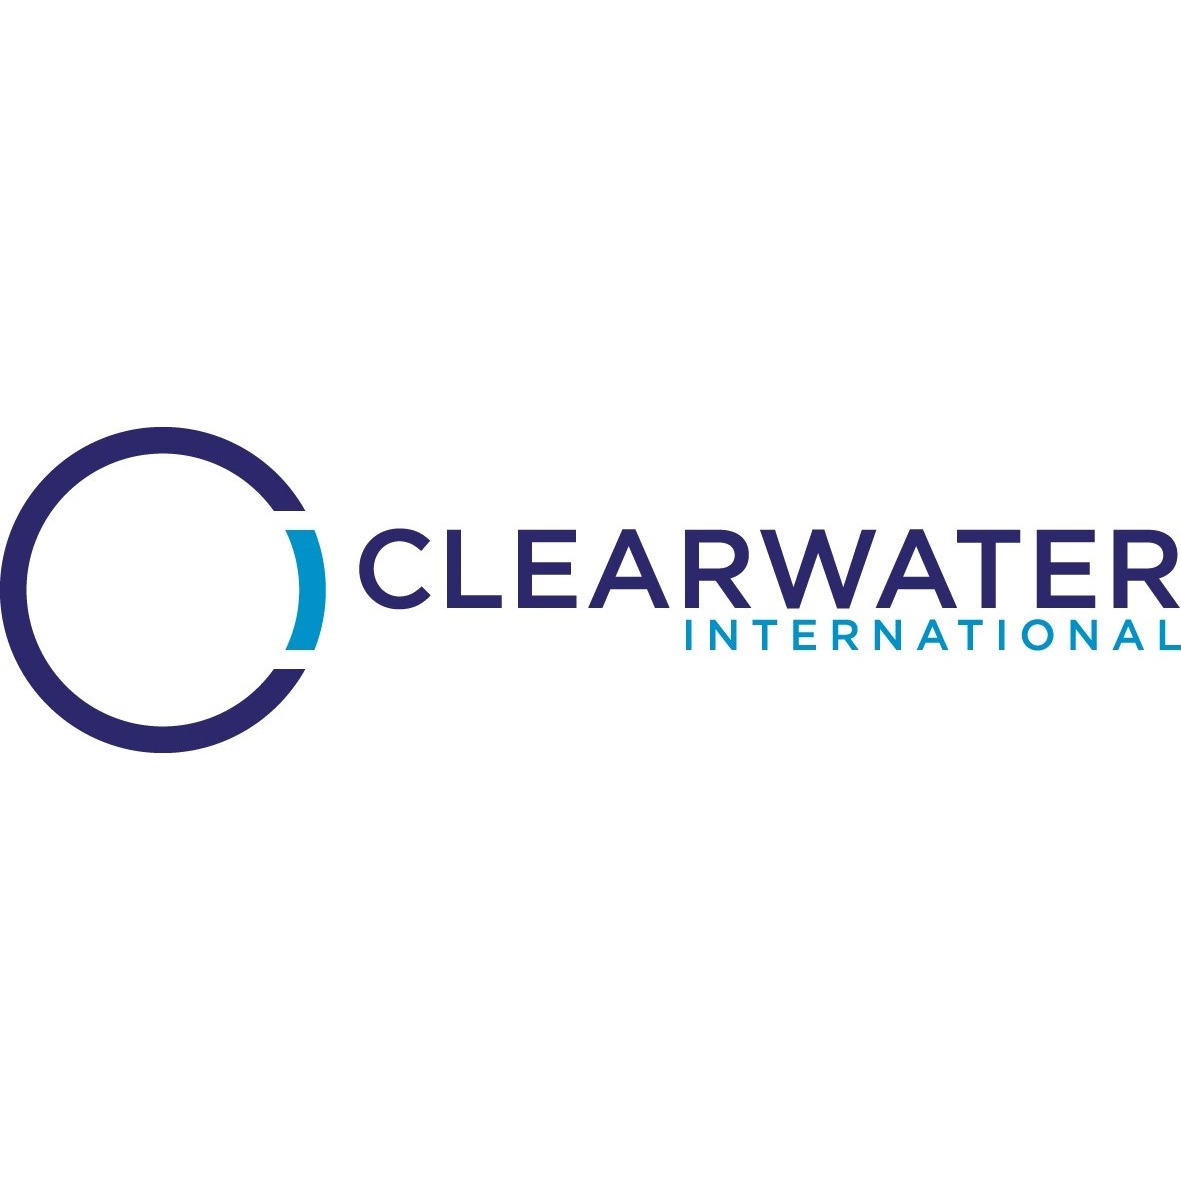 the Clearwater International logo.